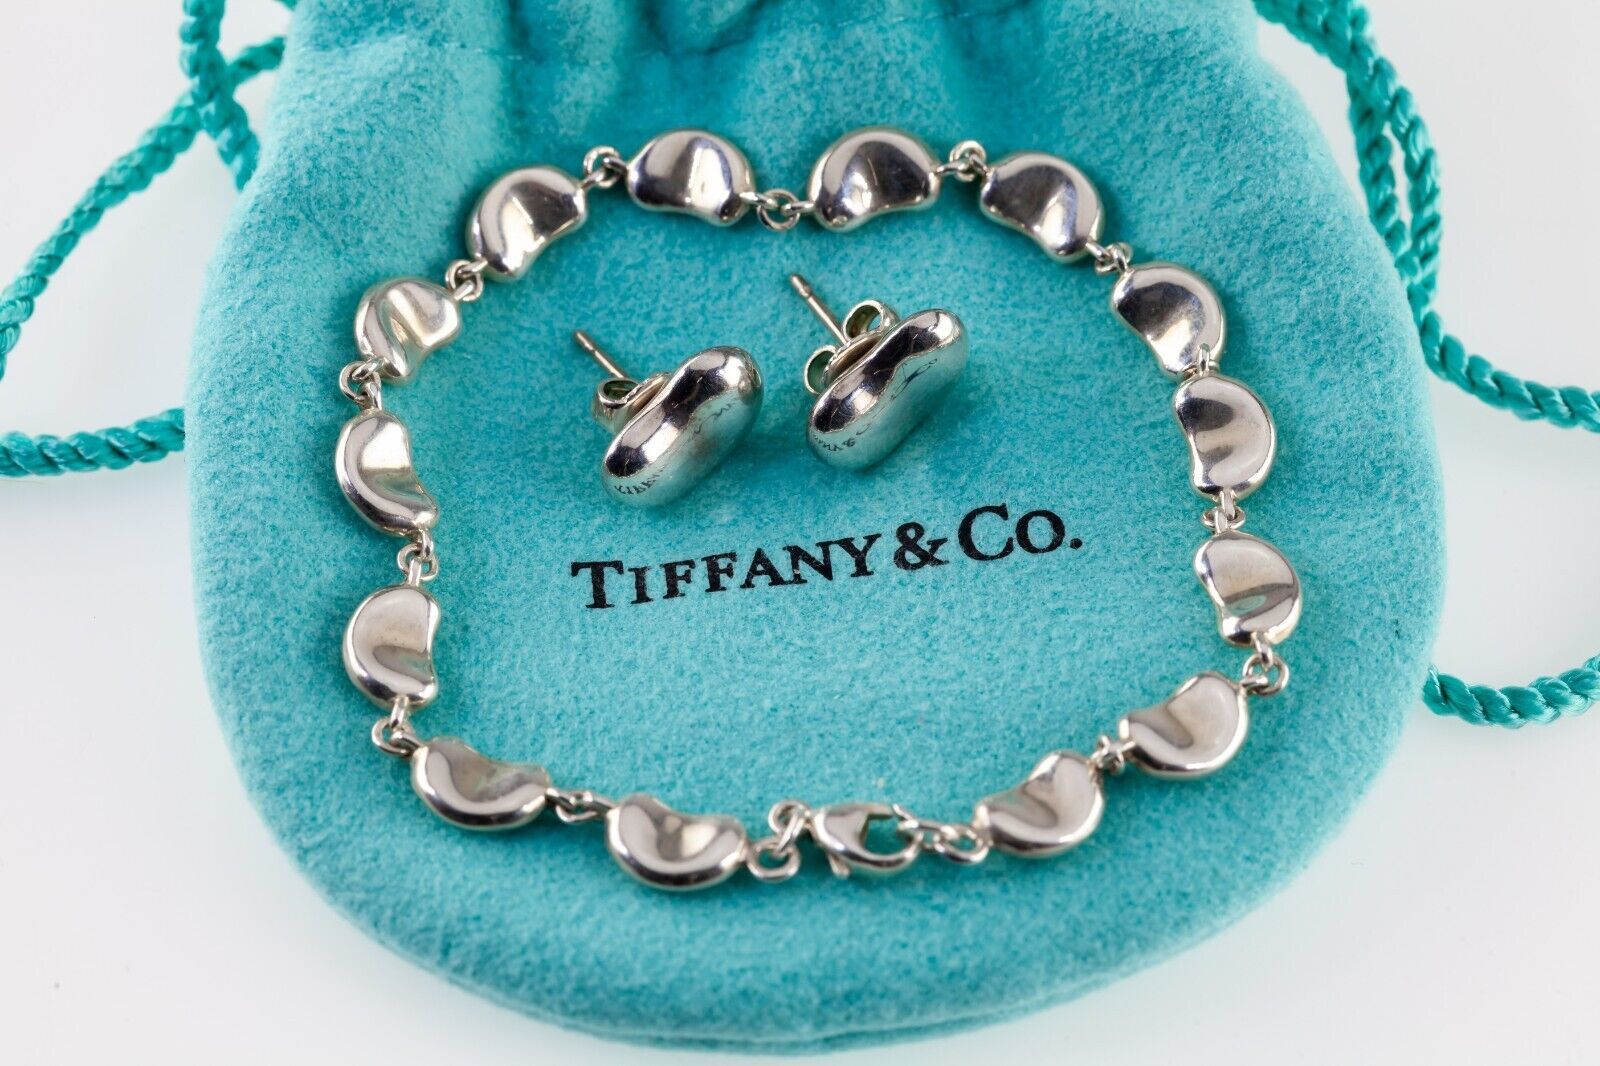 Primary image for Tiffany & Co. Sterling Silver Elsa Peretti Bean Bracelet and Earring Set w/ Box